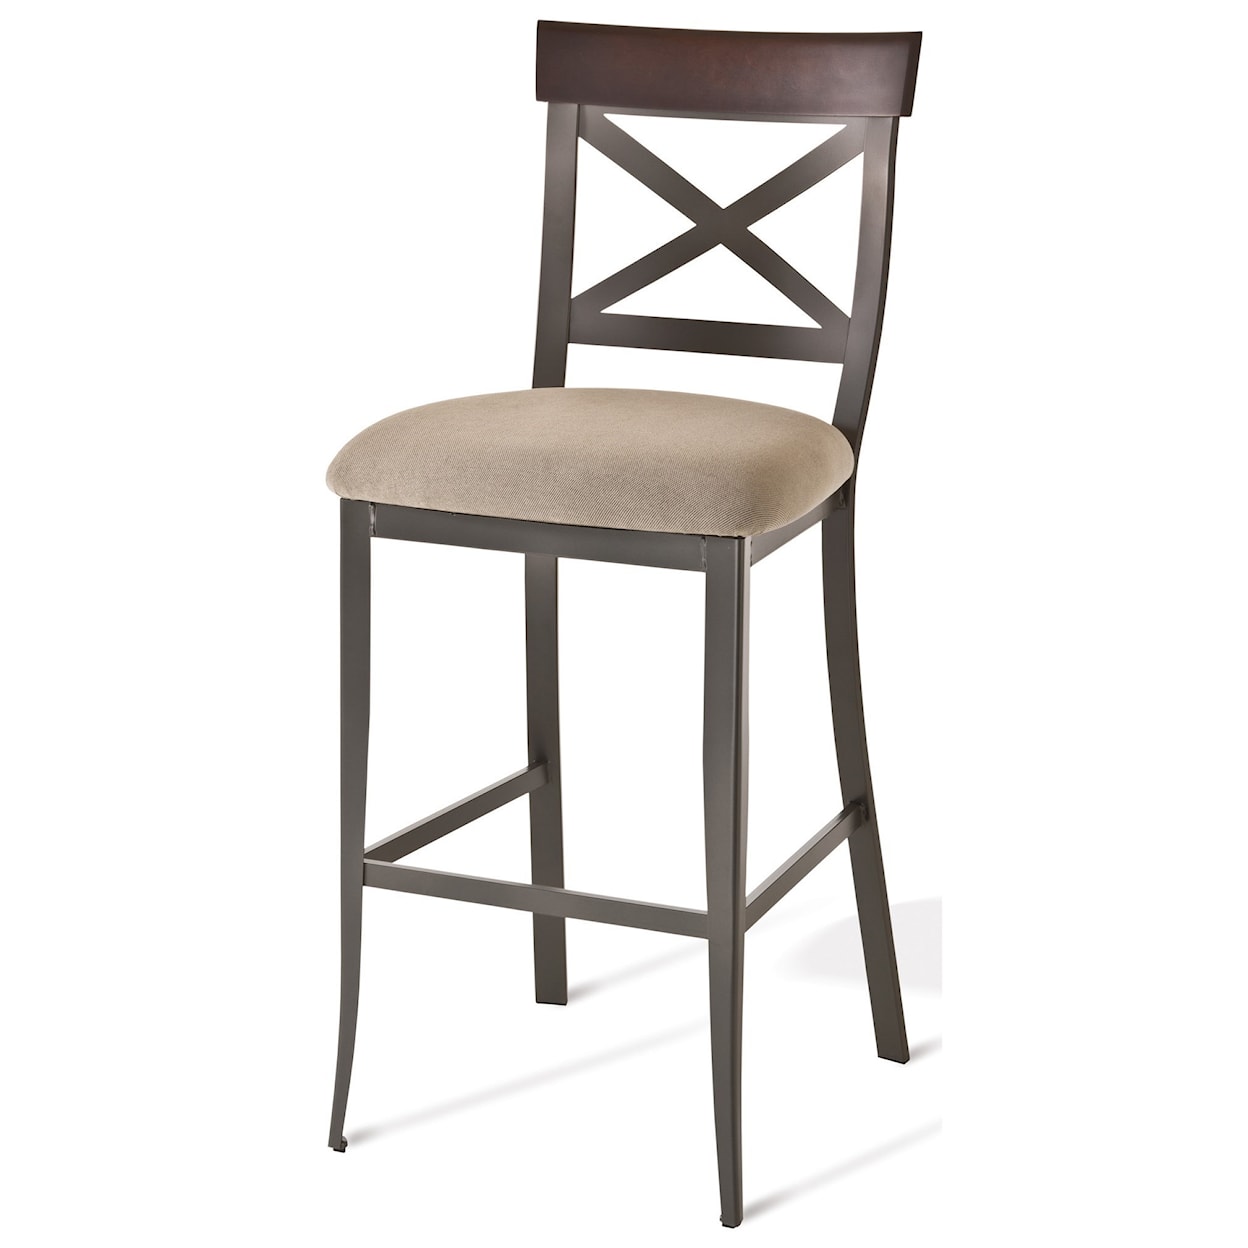 Amisco Countryside 30" Kyle Bar Stool with Upholstered Seat